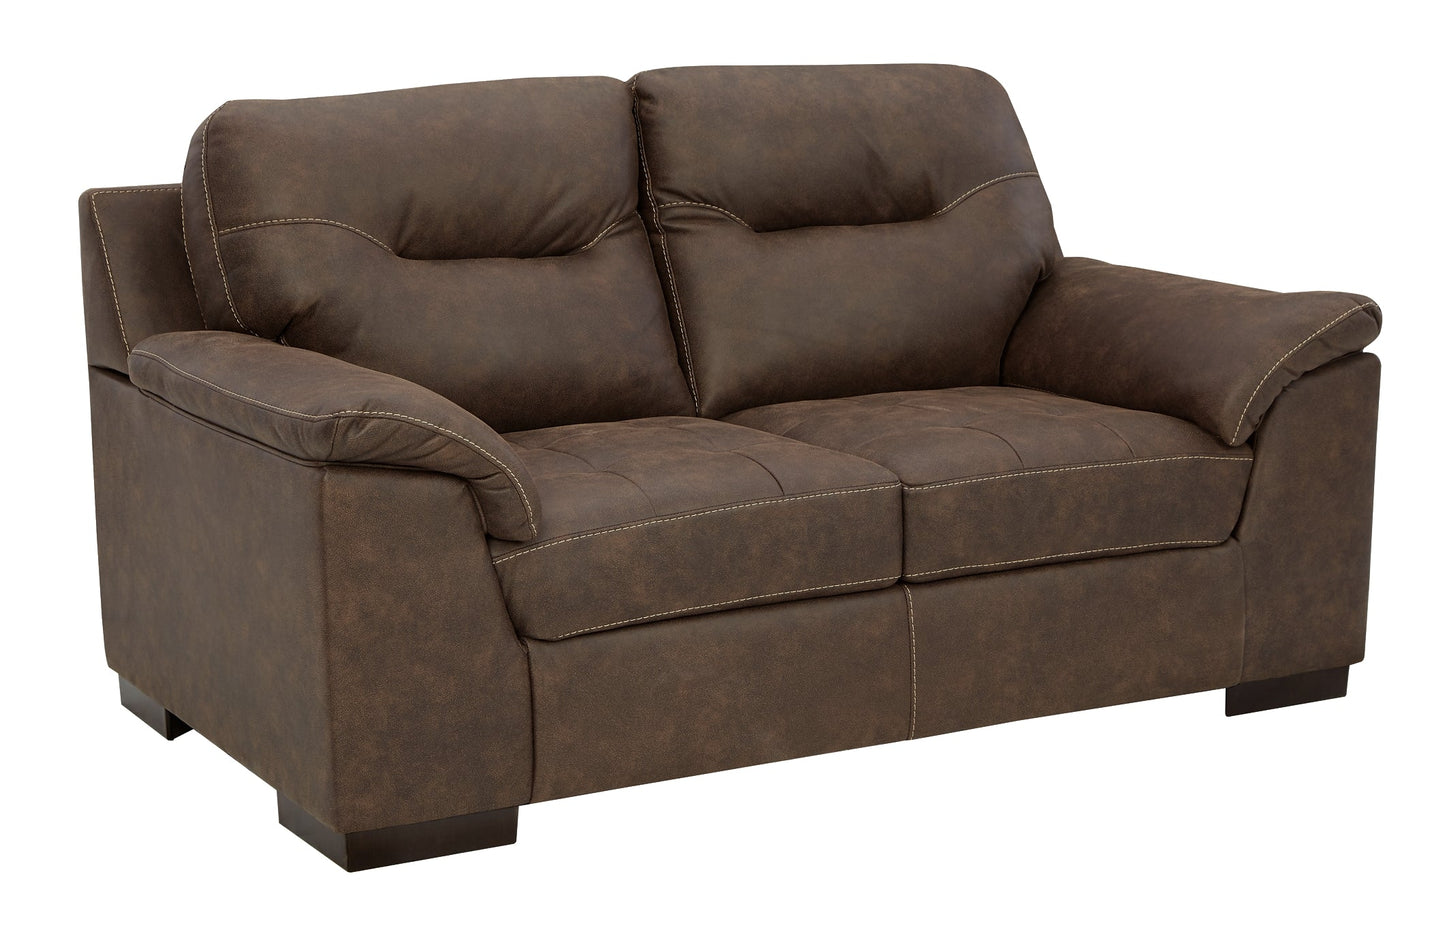 Maderla Sofa, Loveseat and Chair at Walker Mattress and Furniture Locations in Cedar Park and Belton TX.